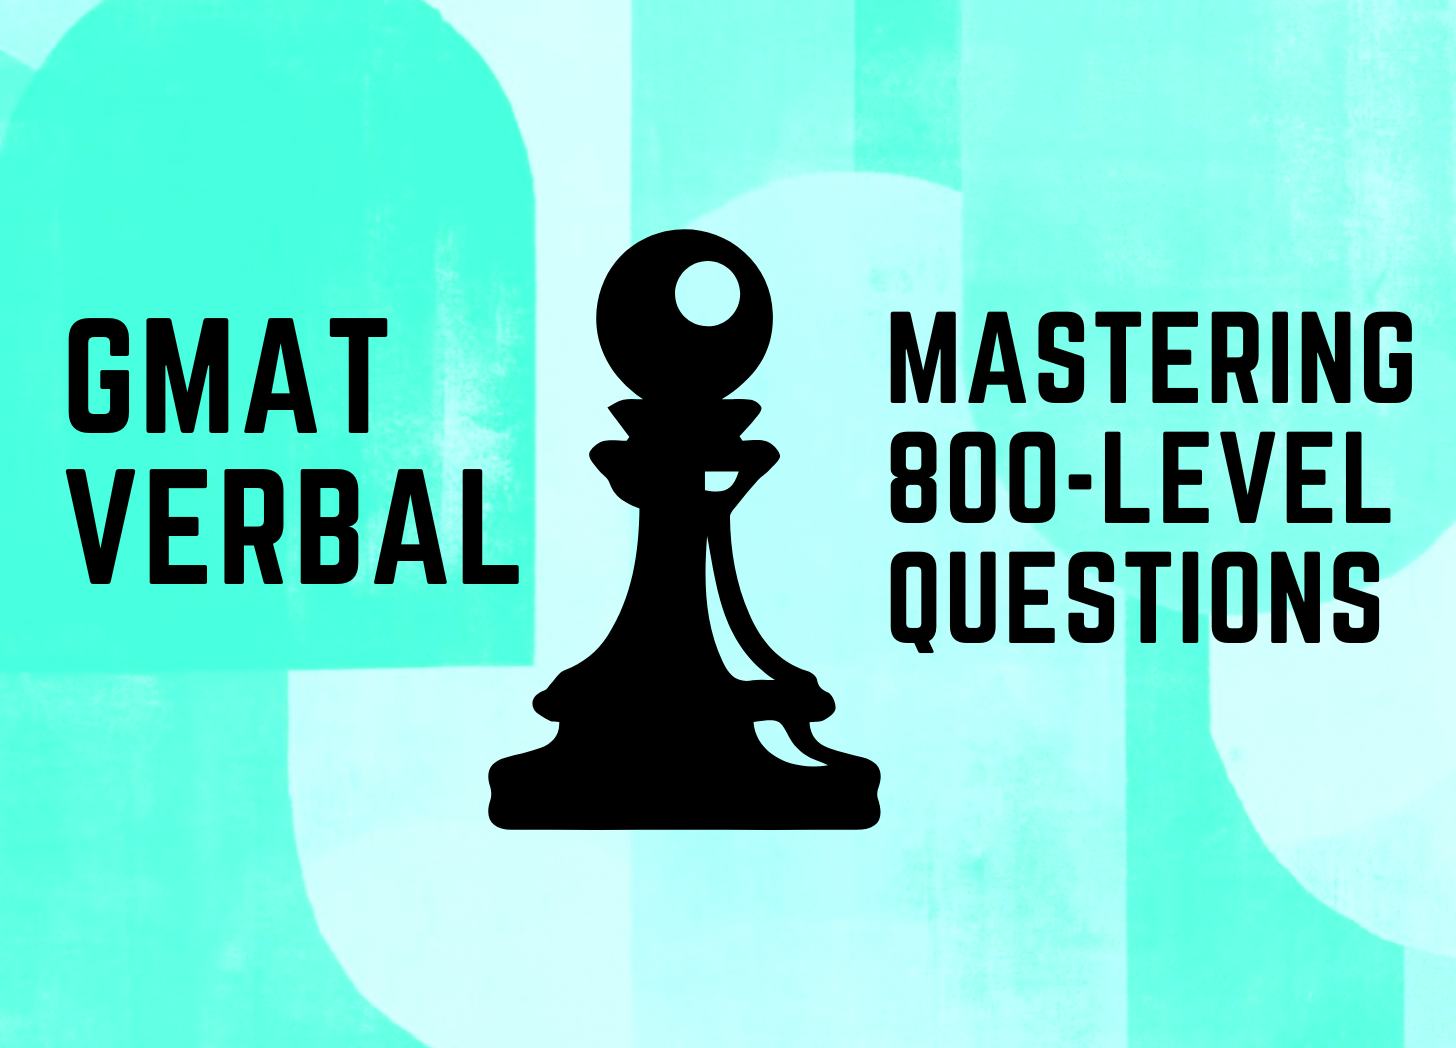 GMAT Verbal: Mastering 800-Level Questions